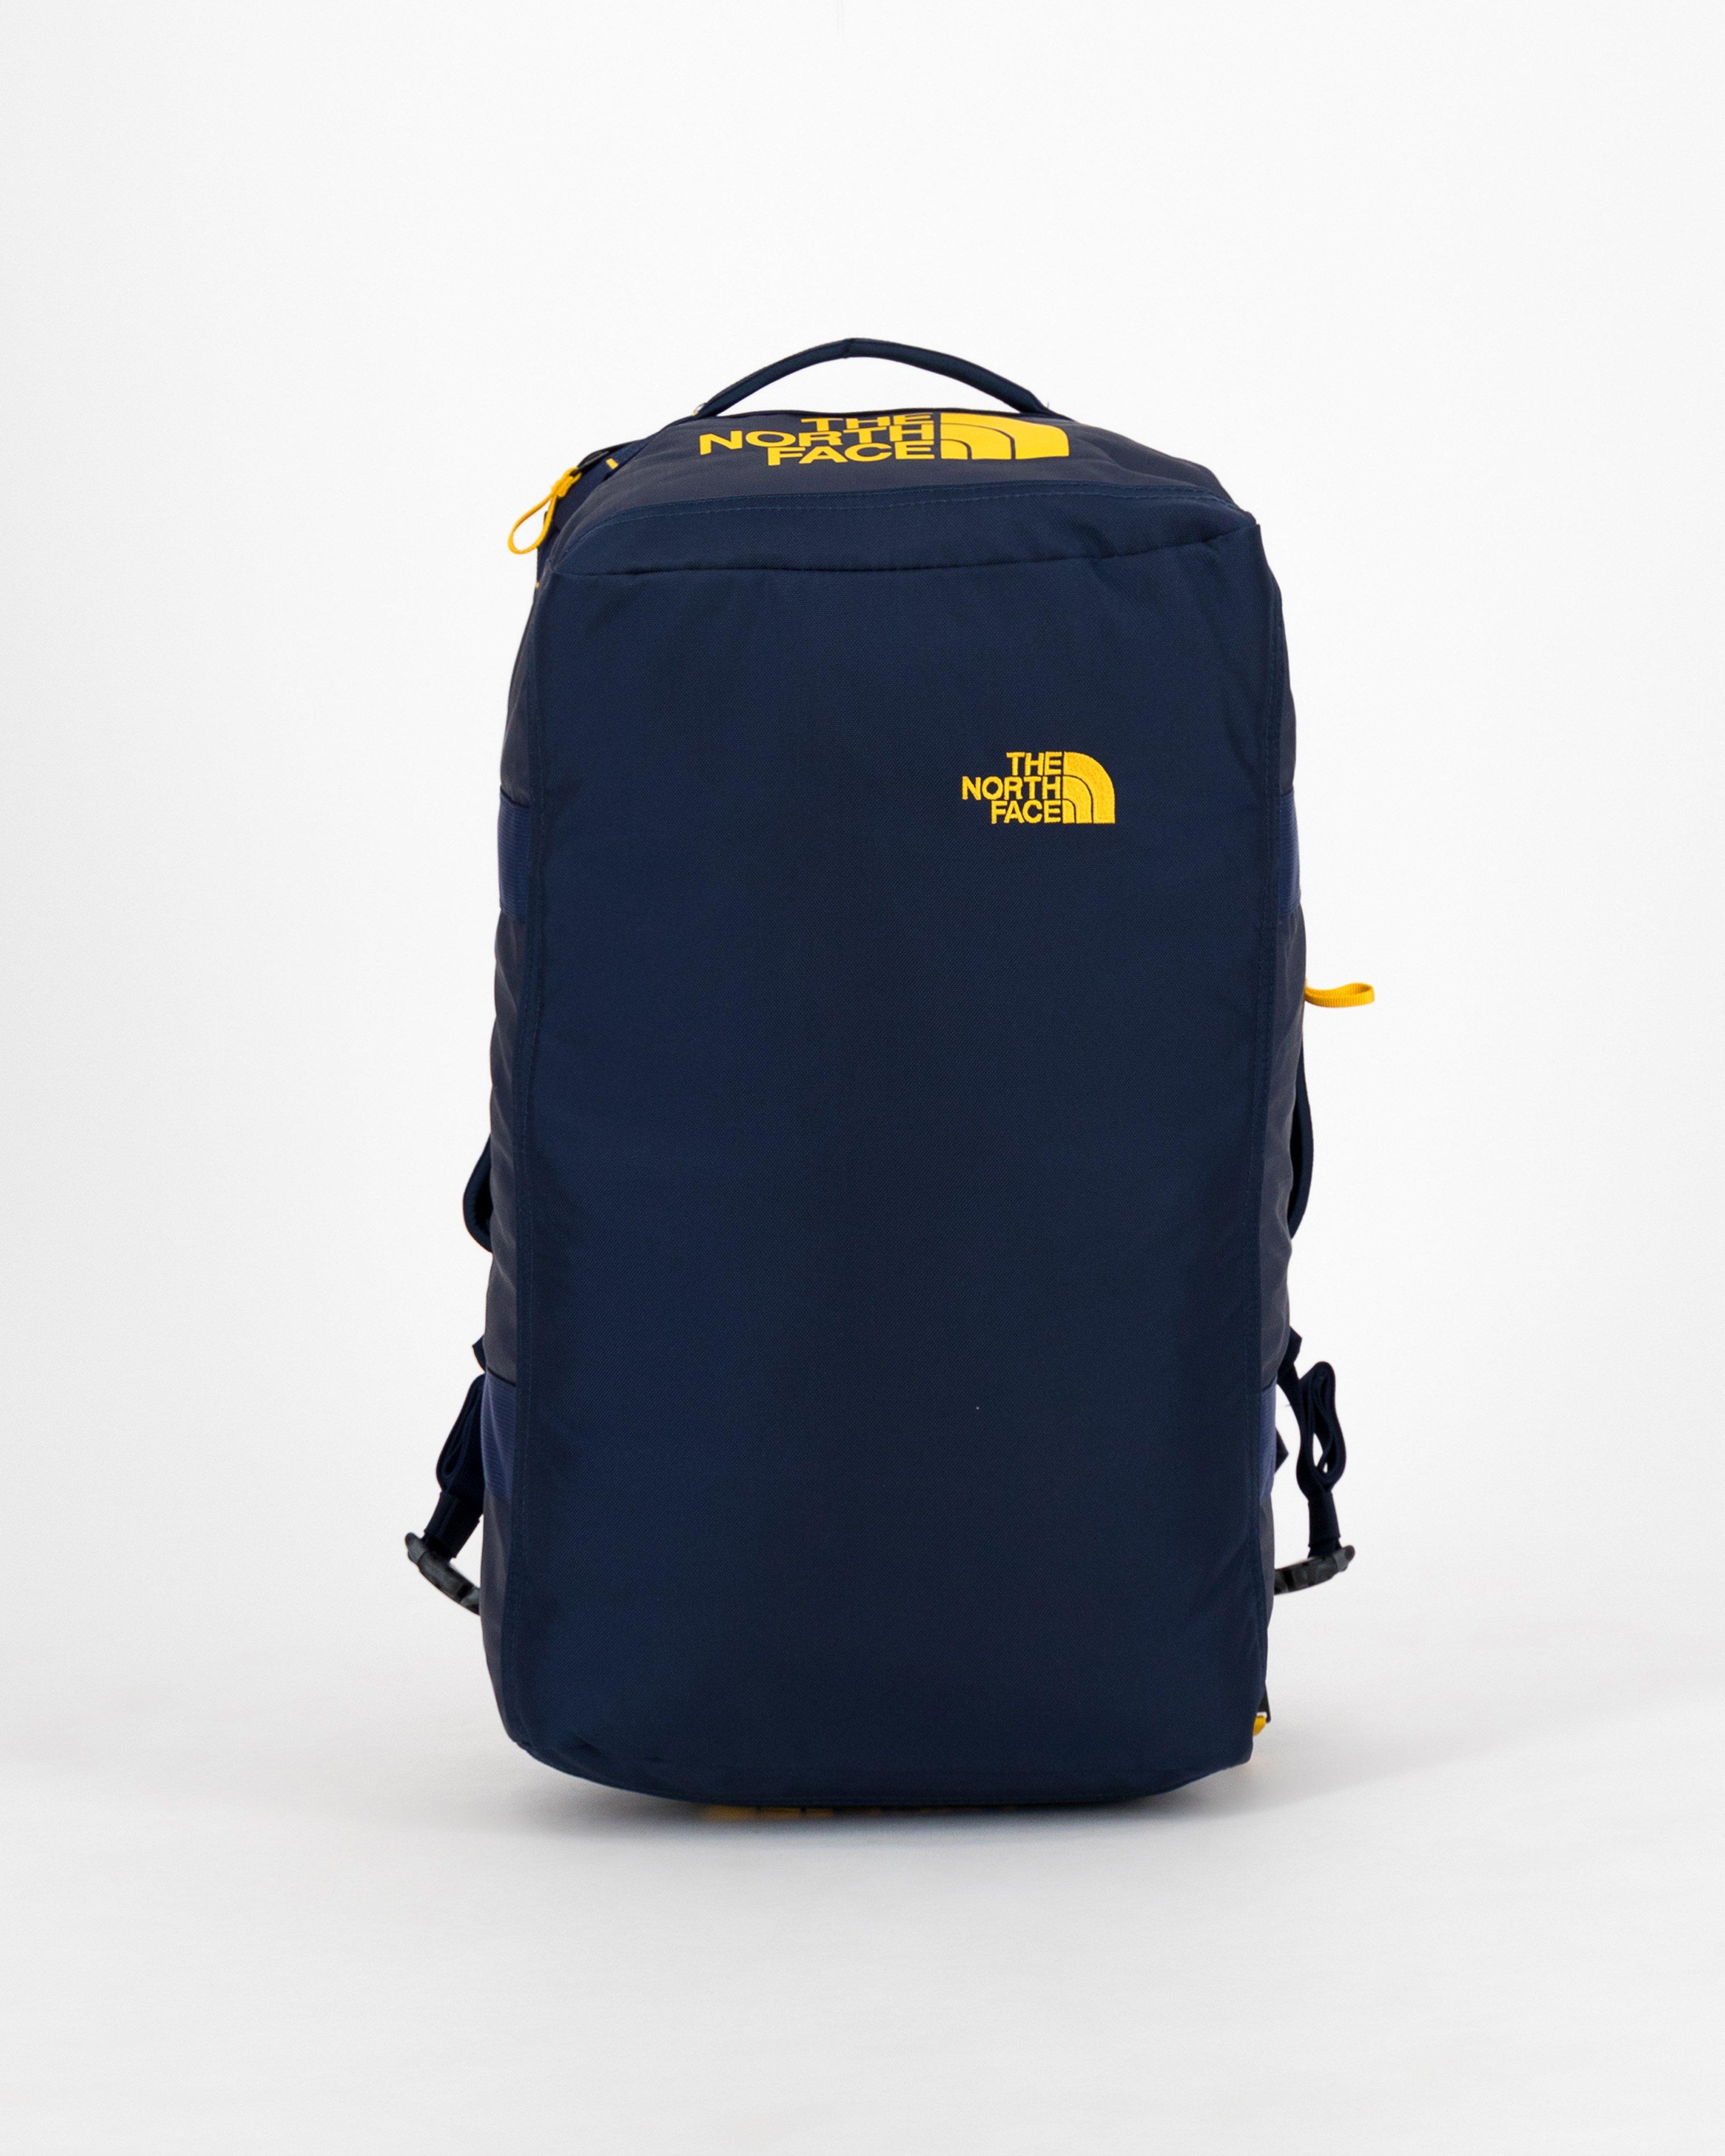 The North Face BC Voyager Duffel Bag - 32L -  Navy